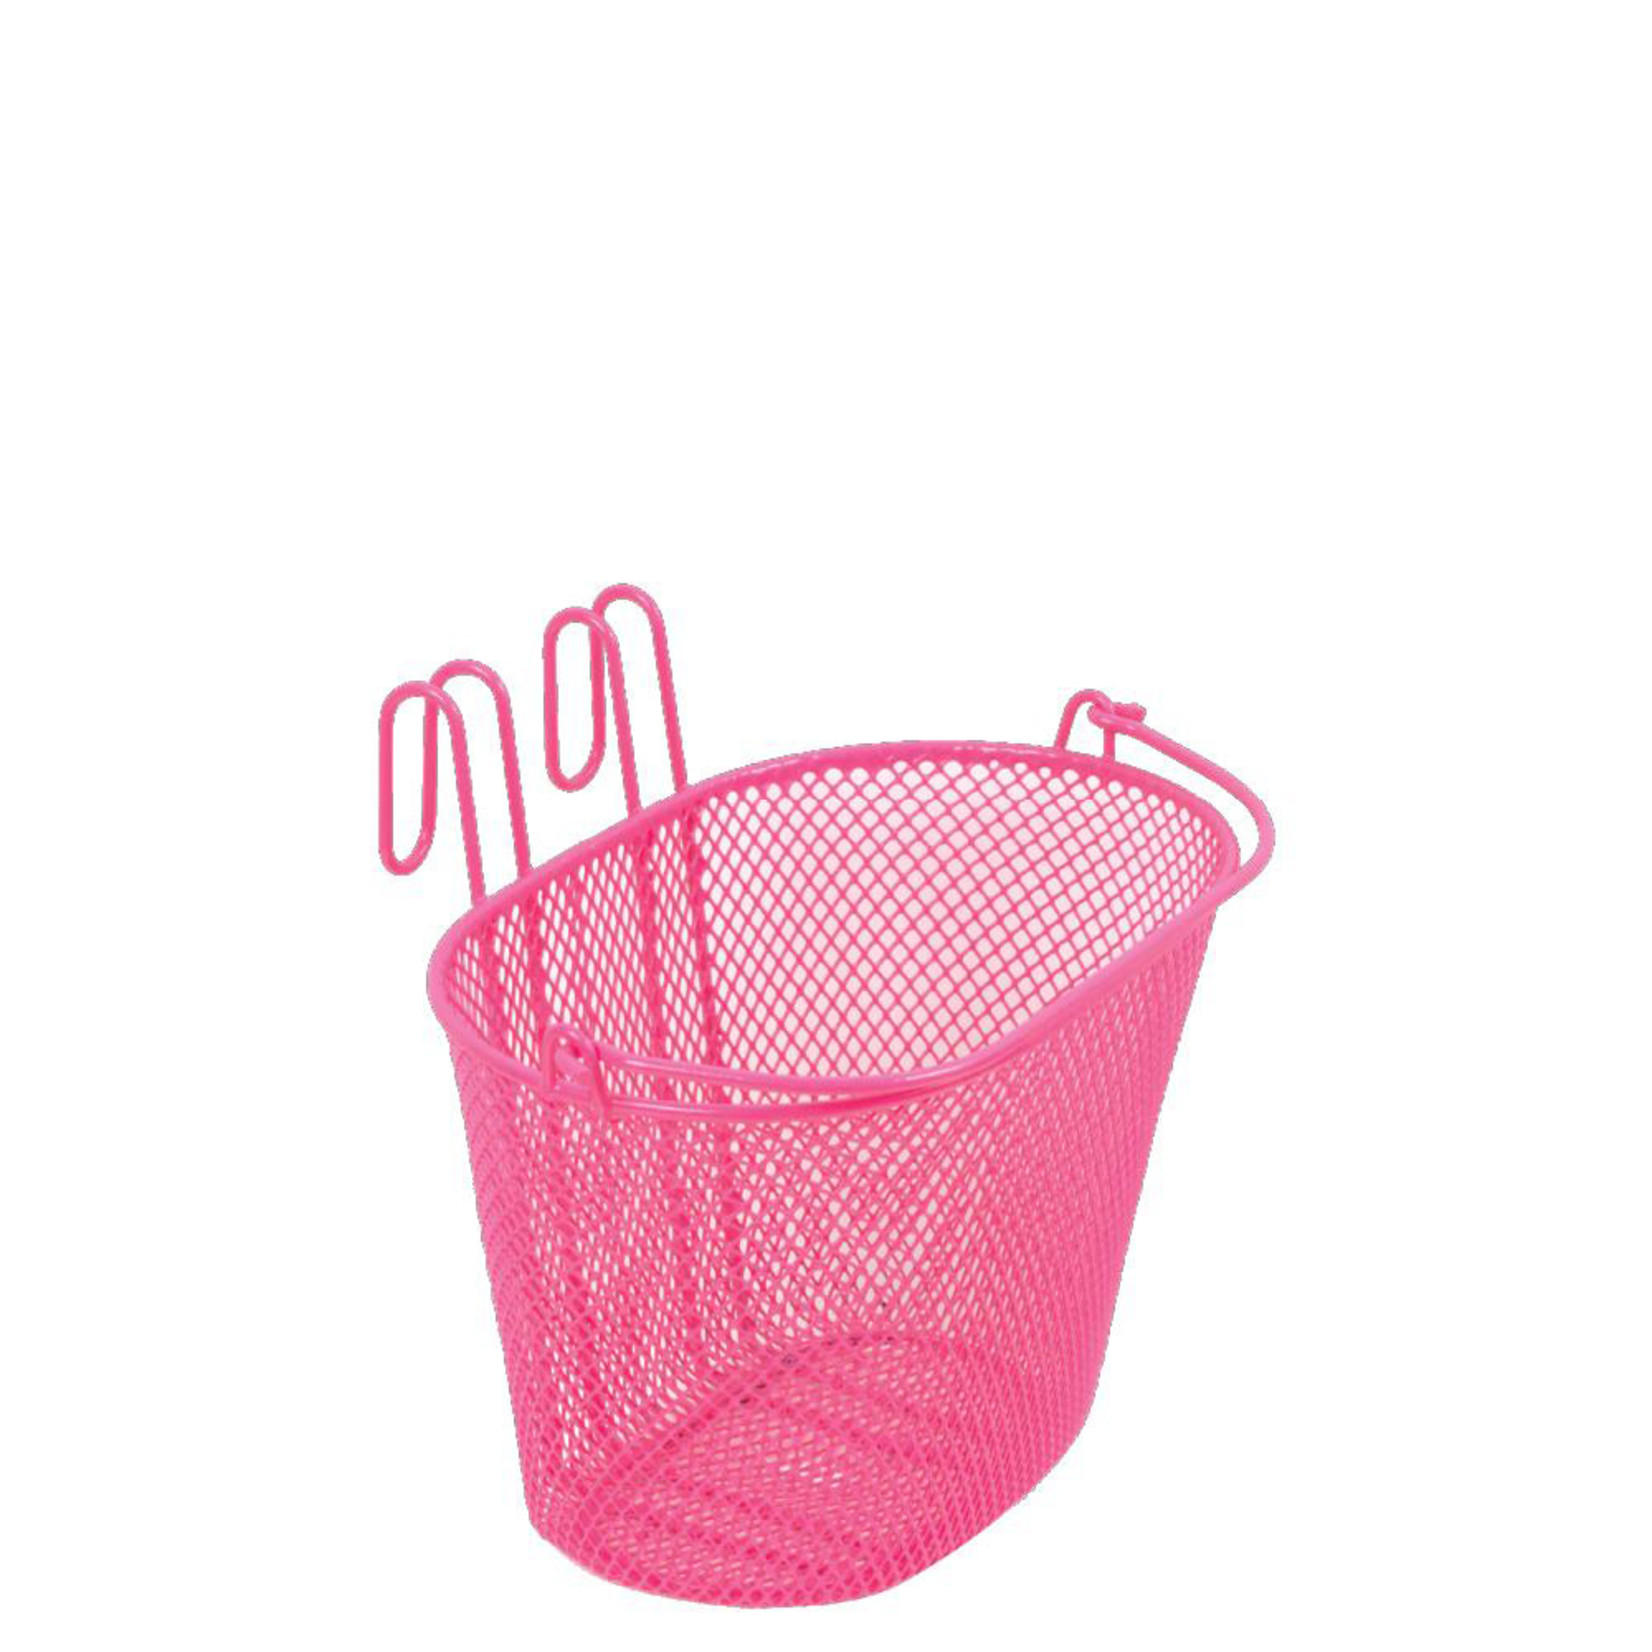 Bikecorp BC Bike/Cycling Basket - Small Wire Front Bike Basket With Handle - Pink